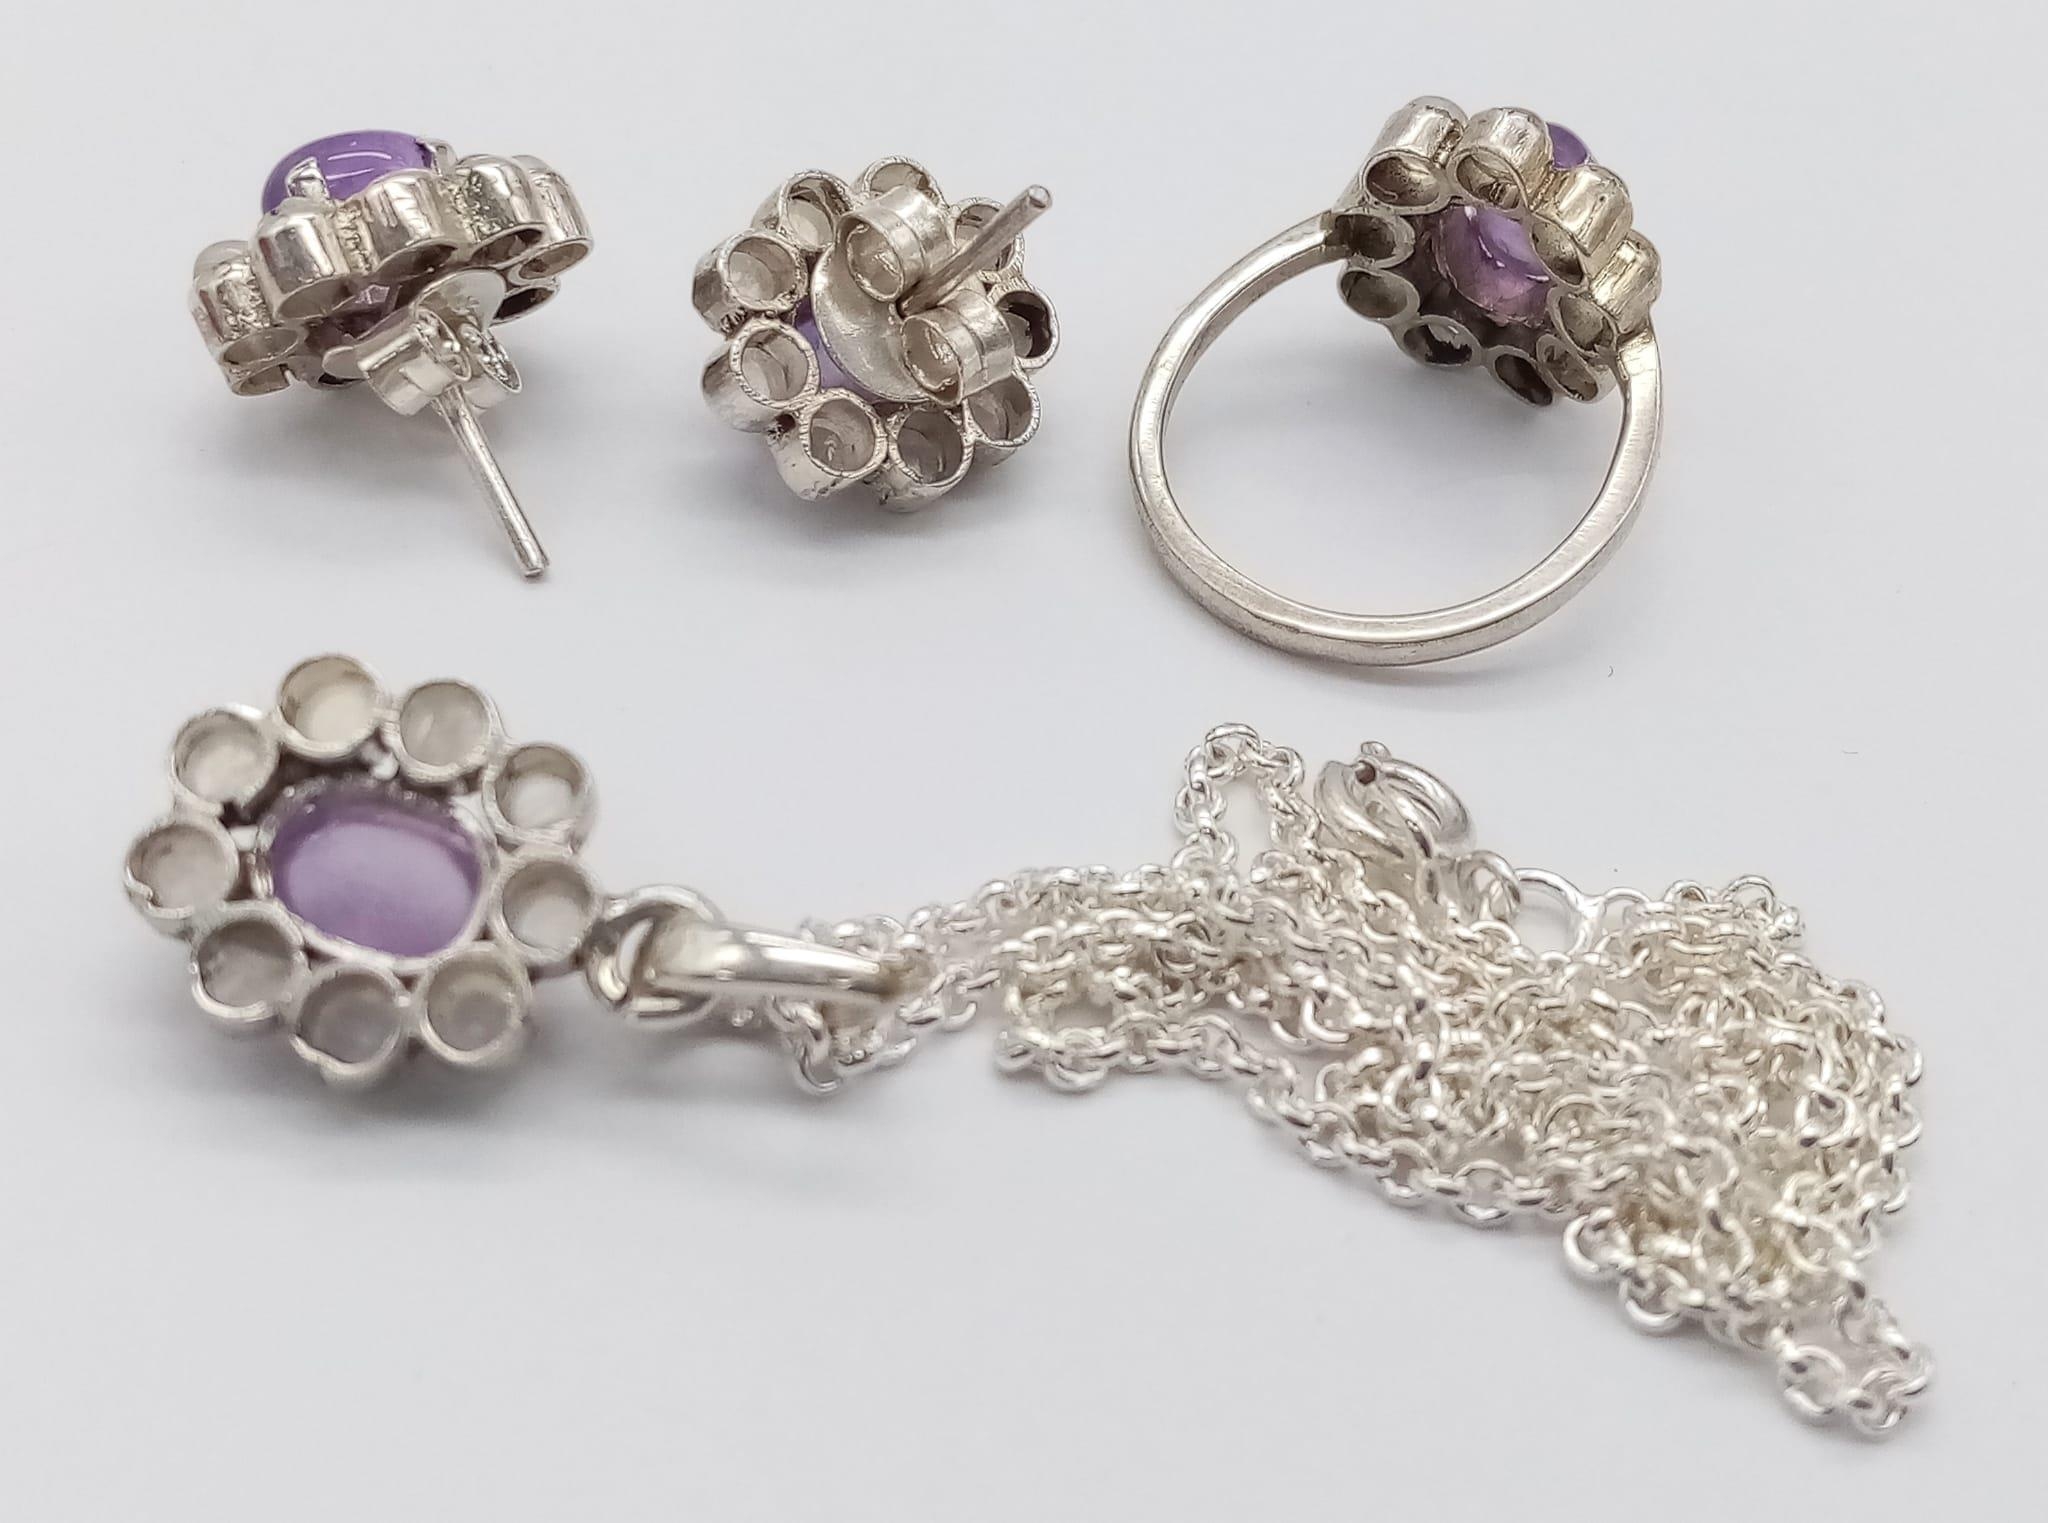 An Amethyst & Moonstone 925 Silver Jewellery set - comprising of a necklace and pendant - 42cm, - Image 3 of 5